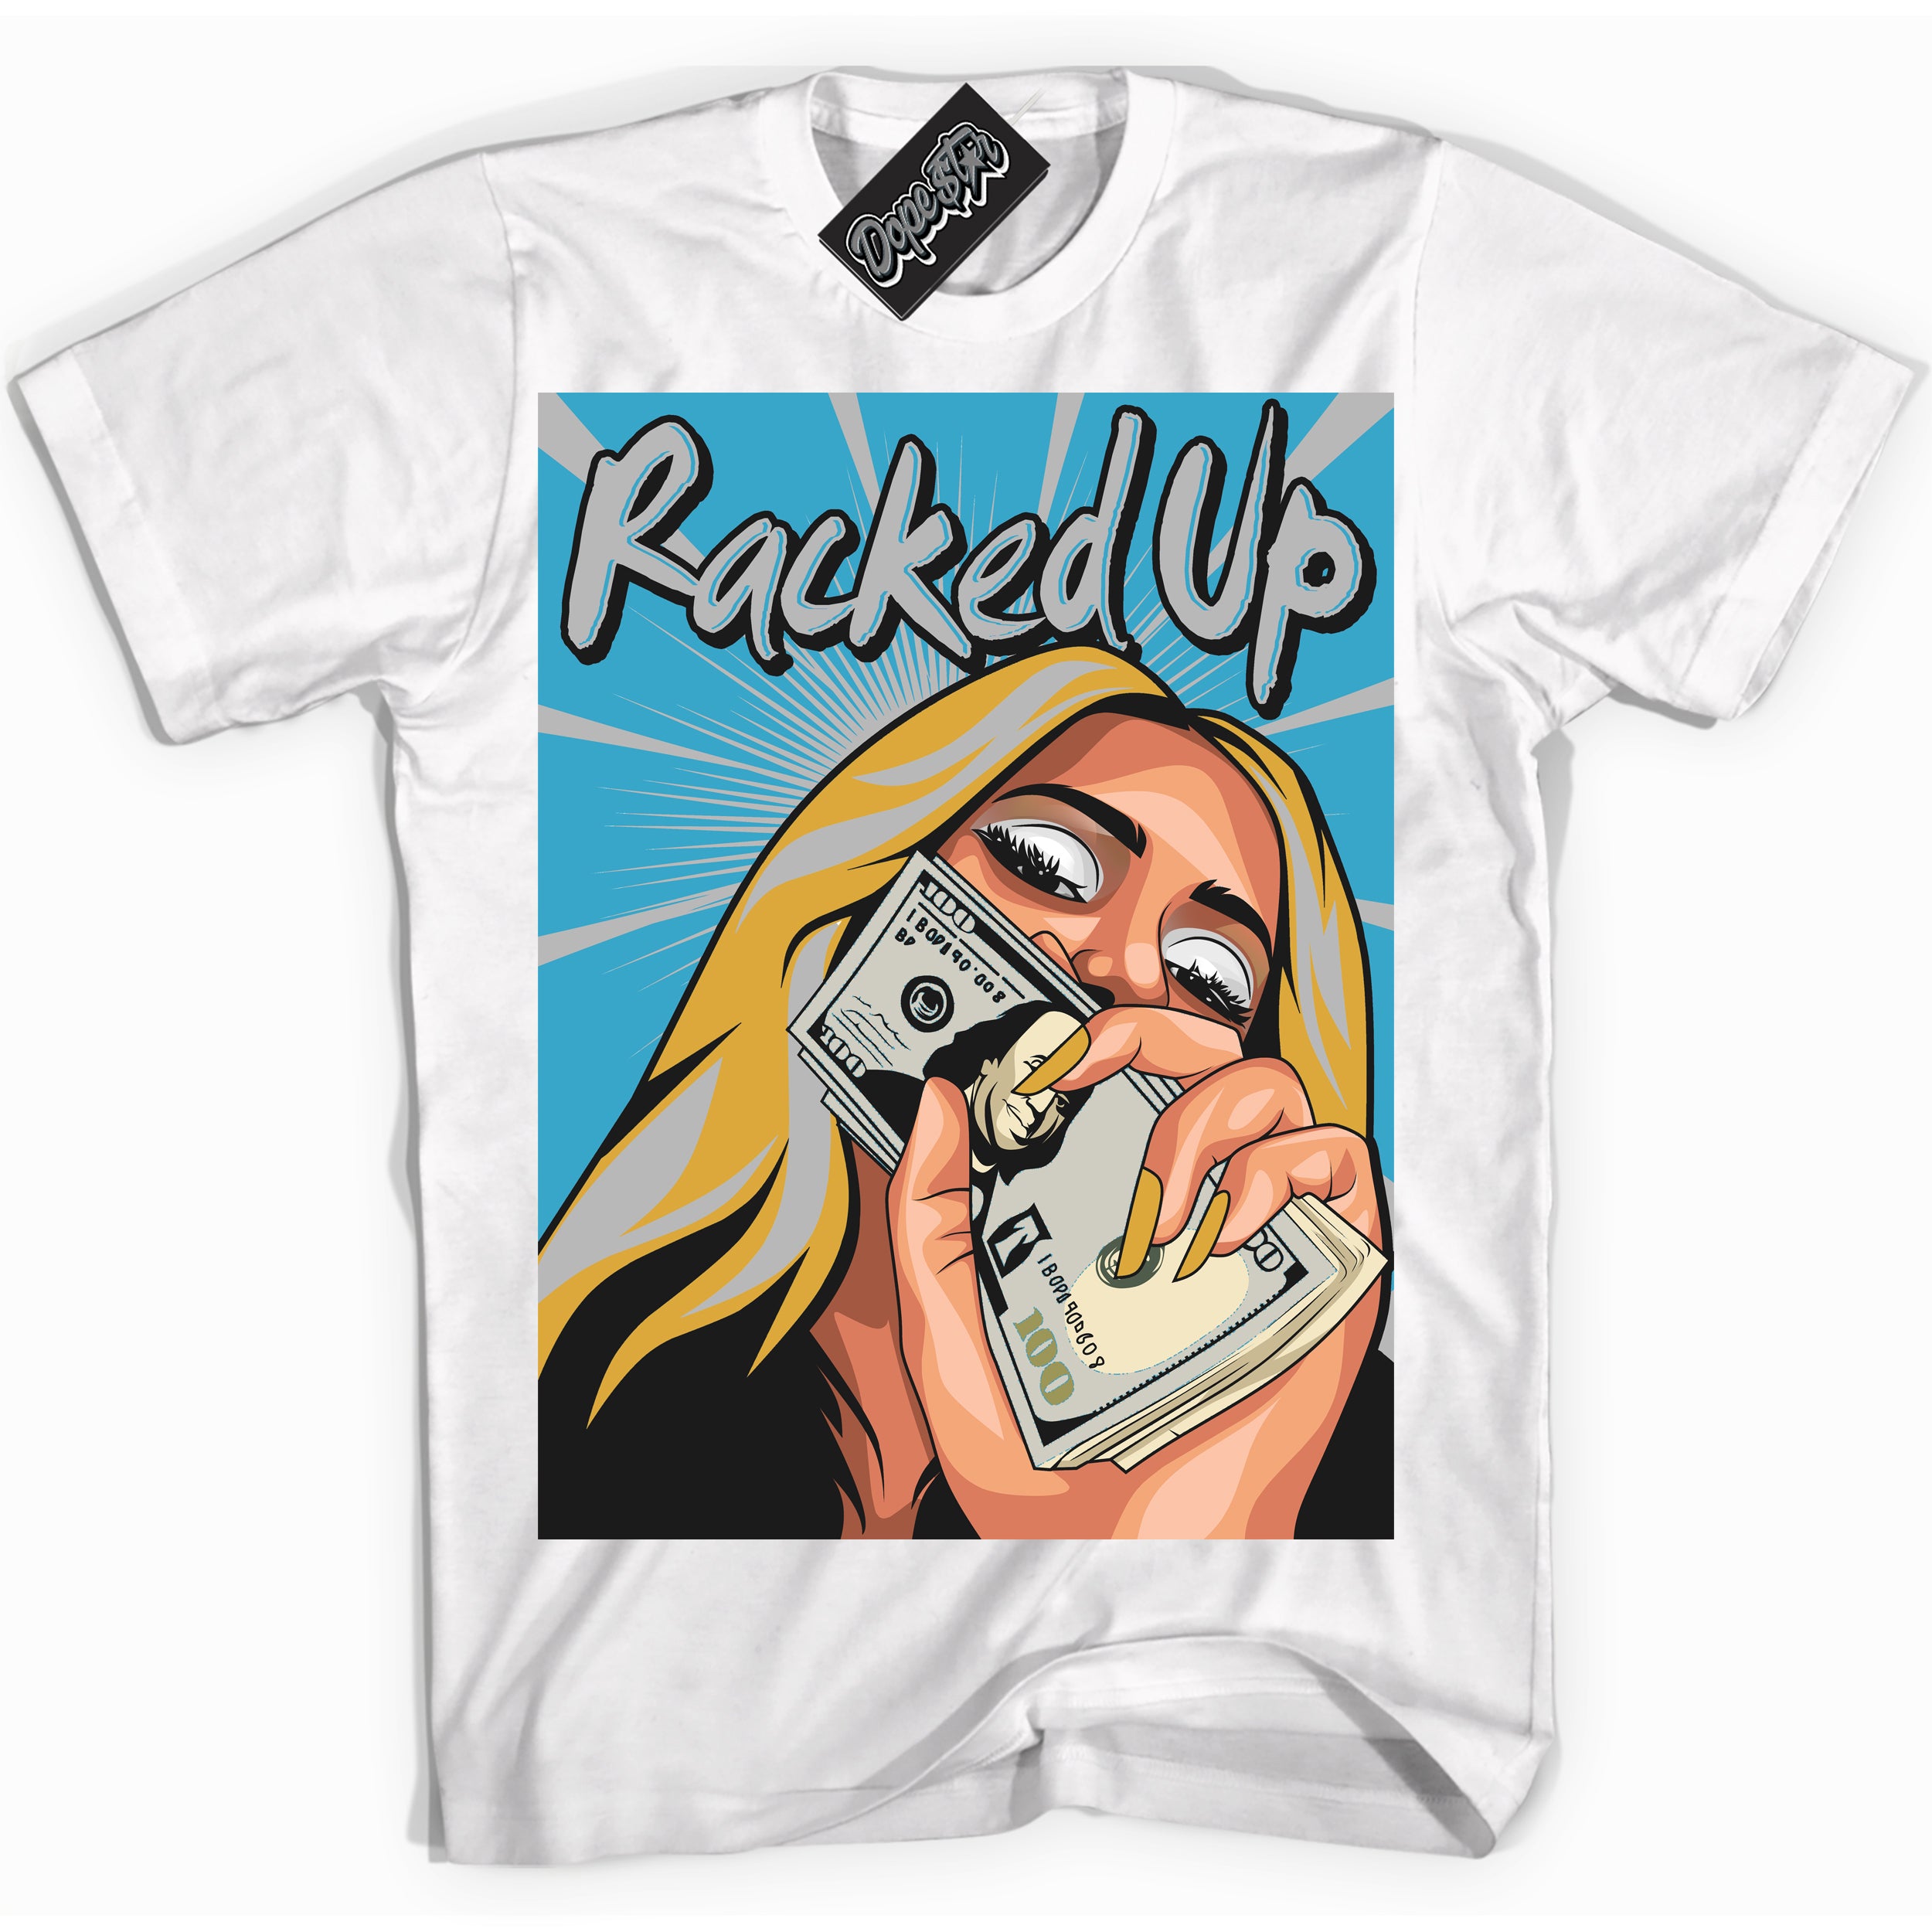 Cool White Shirt with “ Racked Up” design that perfectly matches Aqua 5s Sneakers.